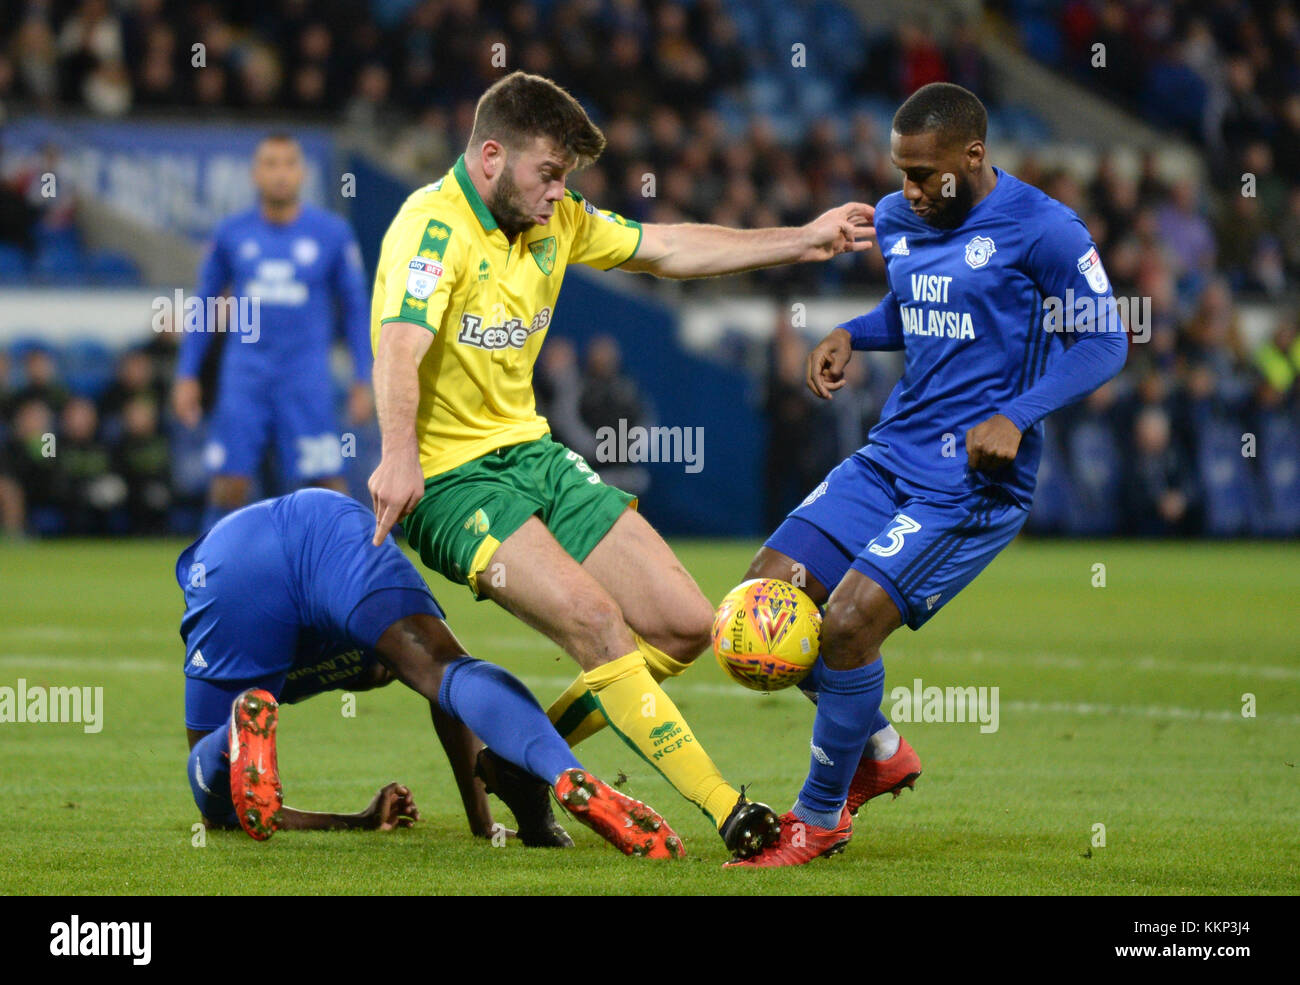 Norwich City's Grant Hanley (centre) and Cardiff City's Joe Bennett battle for the ball during the Sky Bet Championship match at the Cardiff City Stadium, Cardiff. PRESS ASSOCIATION Photo Picture date: Friday December 1, 2017. See PA story SOCCER Cardiff. Photo credit should read: Simon Galloway/PA Wire. RESTICTIONS: EDITORIAL USE ONLY No use with unauthorised audio, video, data, fixture lists, club/league logos or 'live' services. Online in-match use limited to 75 images, no video emulation. No use in betting, games or single club/league/player publications. Stock Photo